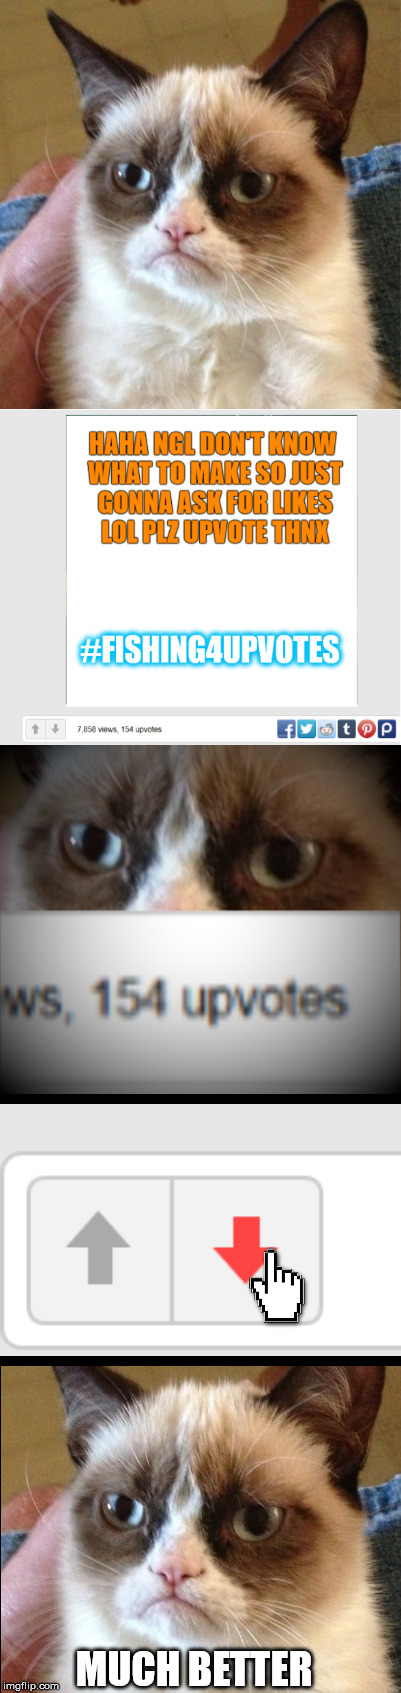 When you see someone fishing for upvotes in the least creative way possible and getting hella likes... | MUCH BETTER | image tagged in fishing for upvotes,grumpy cat,imgflip,imgflip users,memes,funny | made w/ Imgflip meme maker